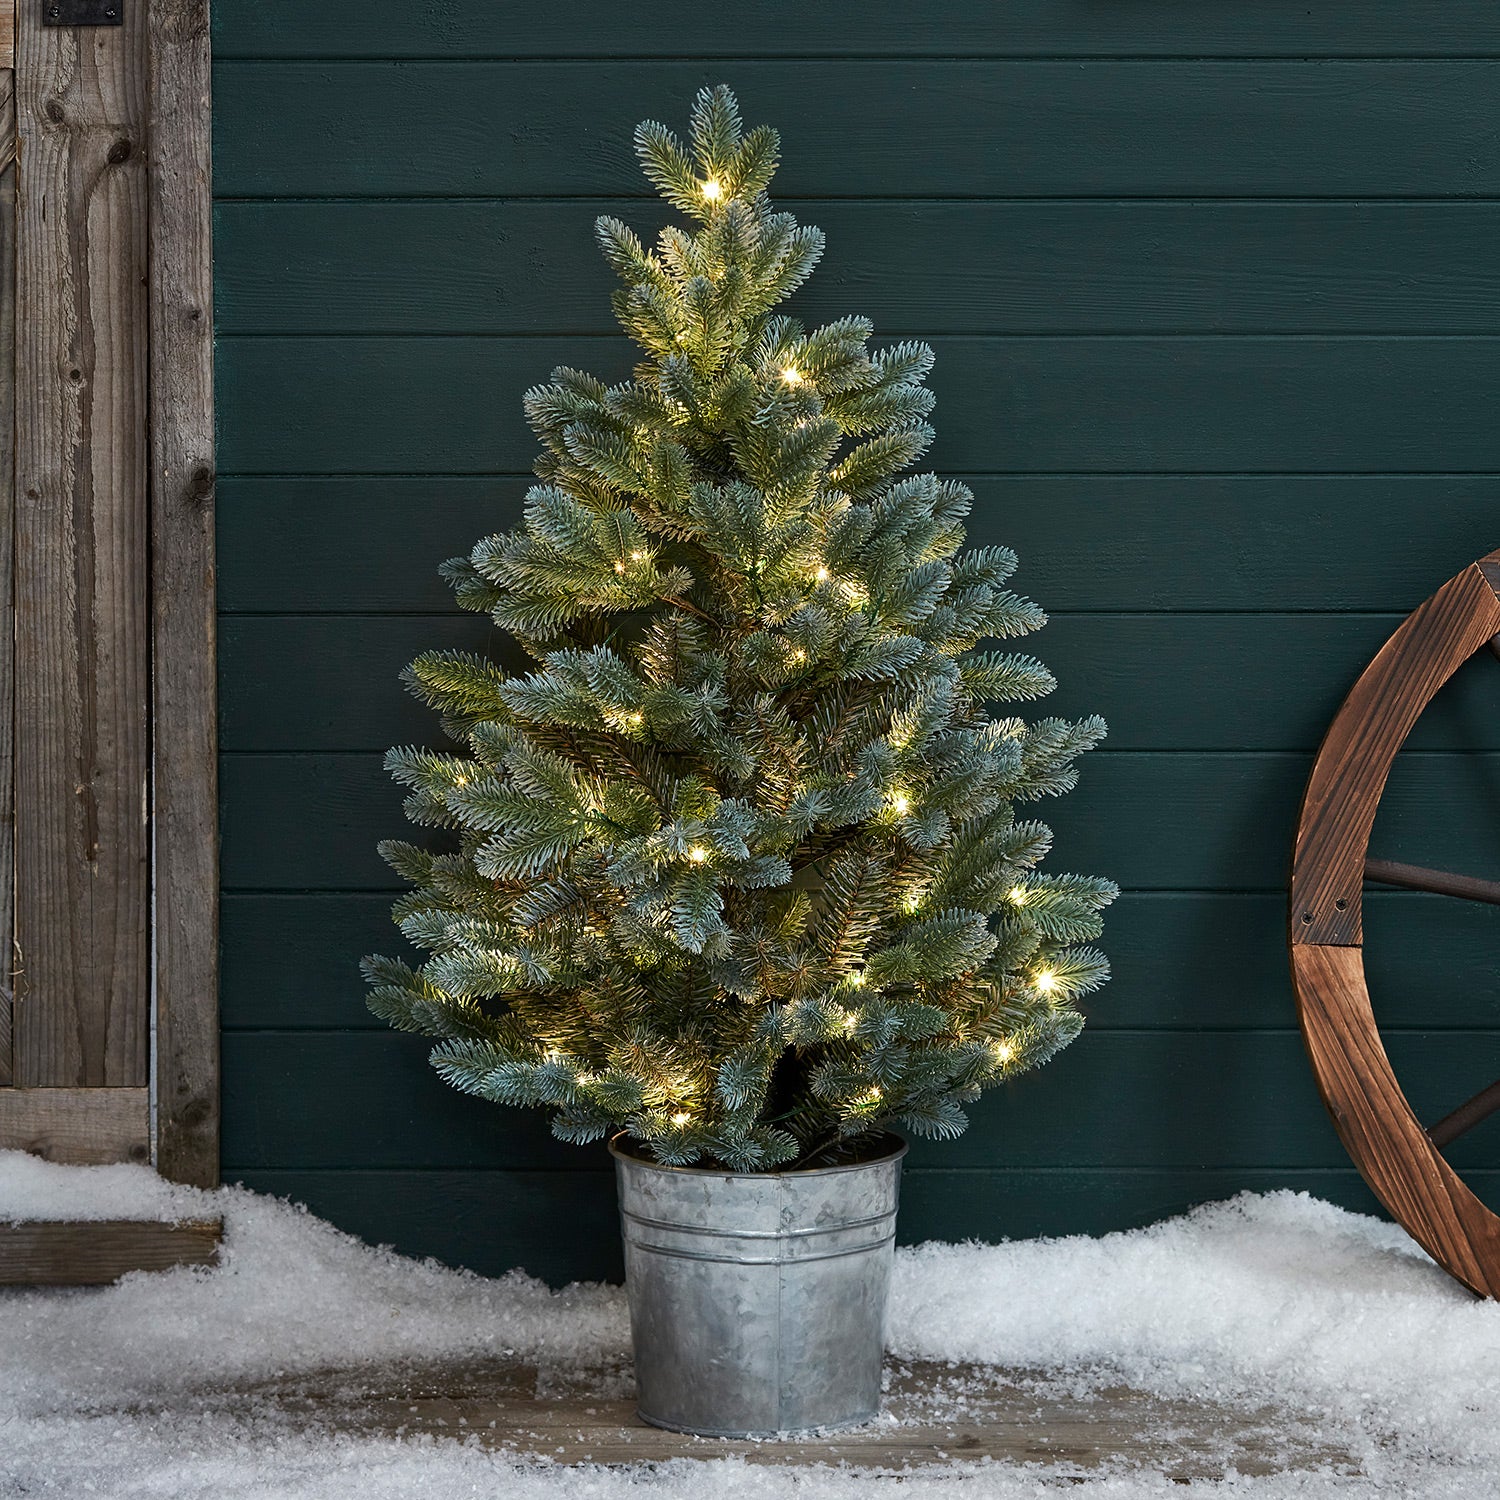 90cm Pre Lit Outdoor Potted Christmas Tree | Lights4fun.co.uk